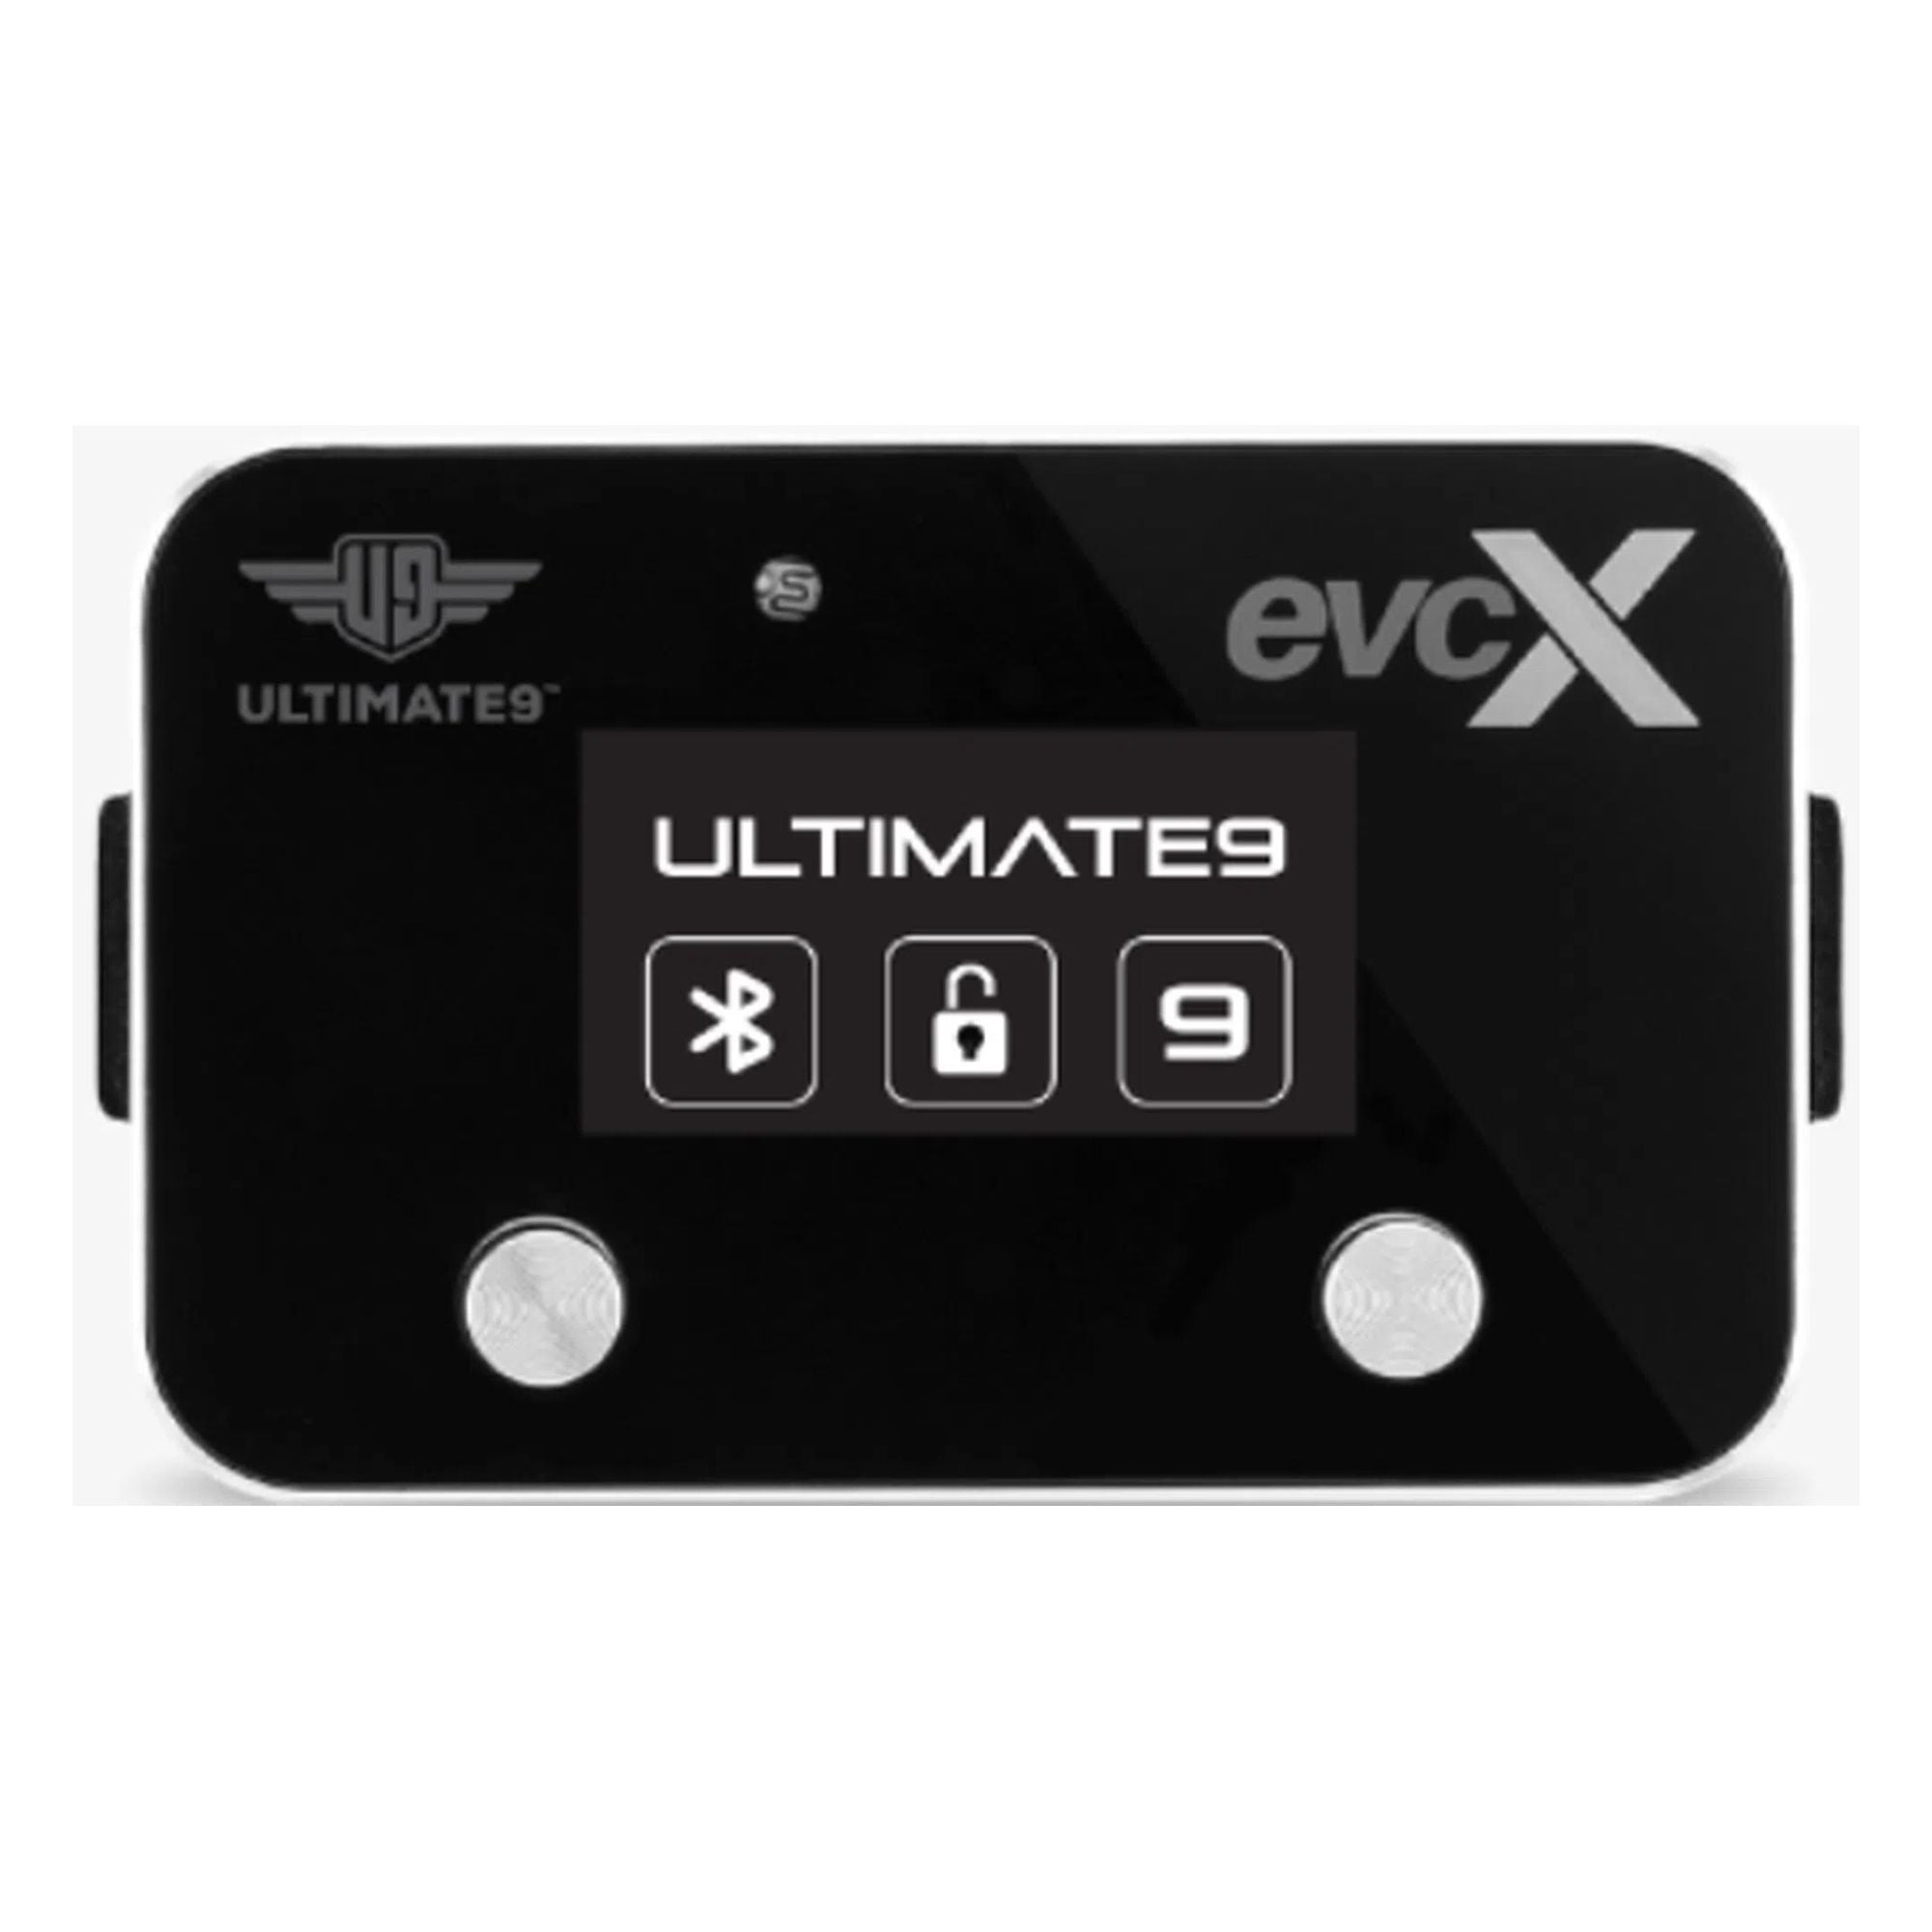 EVC-IDRIVE THROTTLE CONTROLLER FORD MUSTANG 2015 - ON (6th Gen) - iDRIVENZ